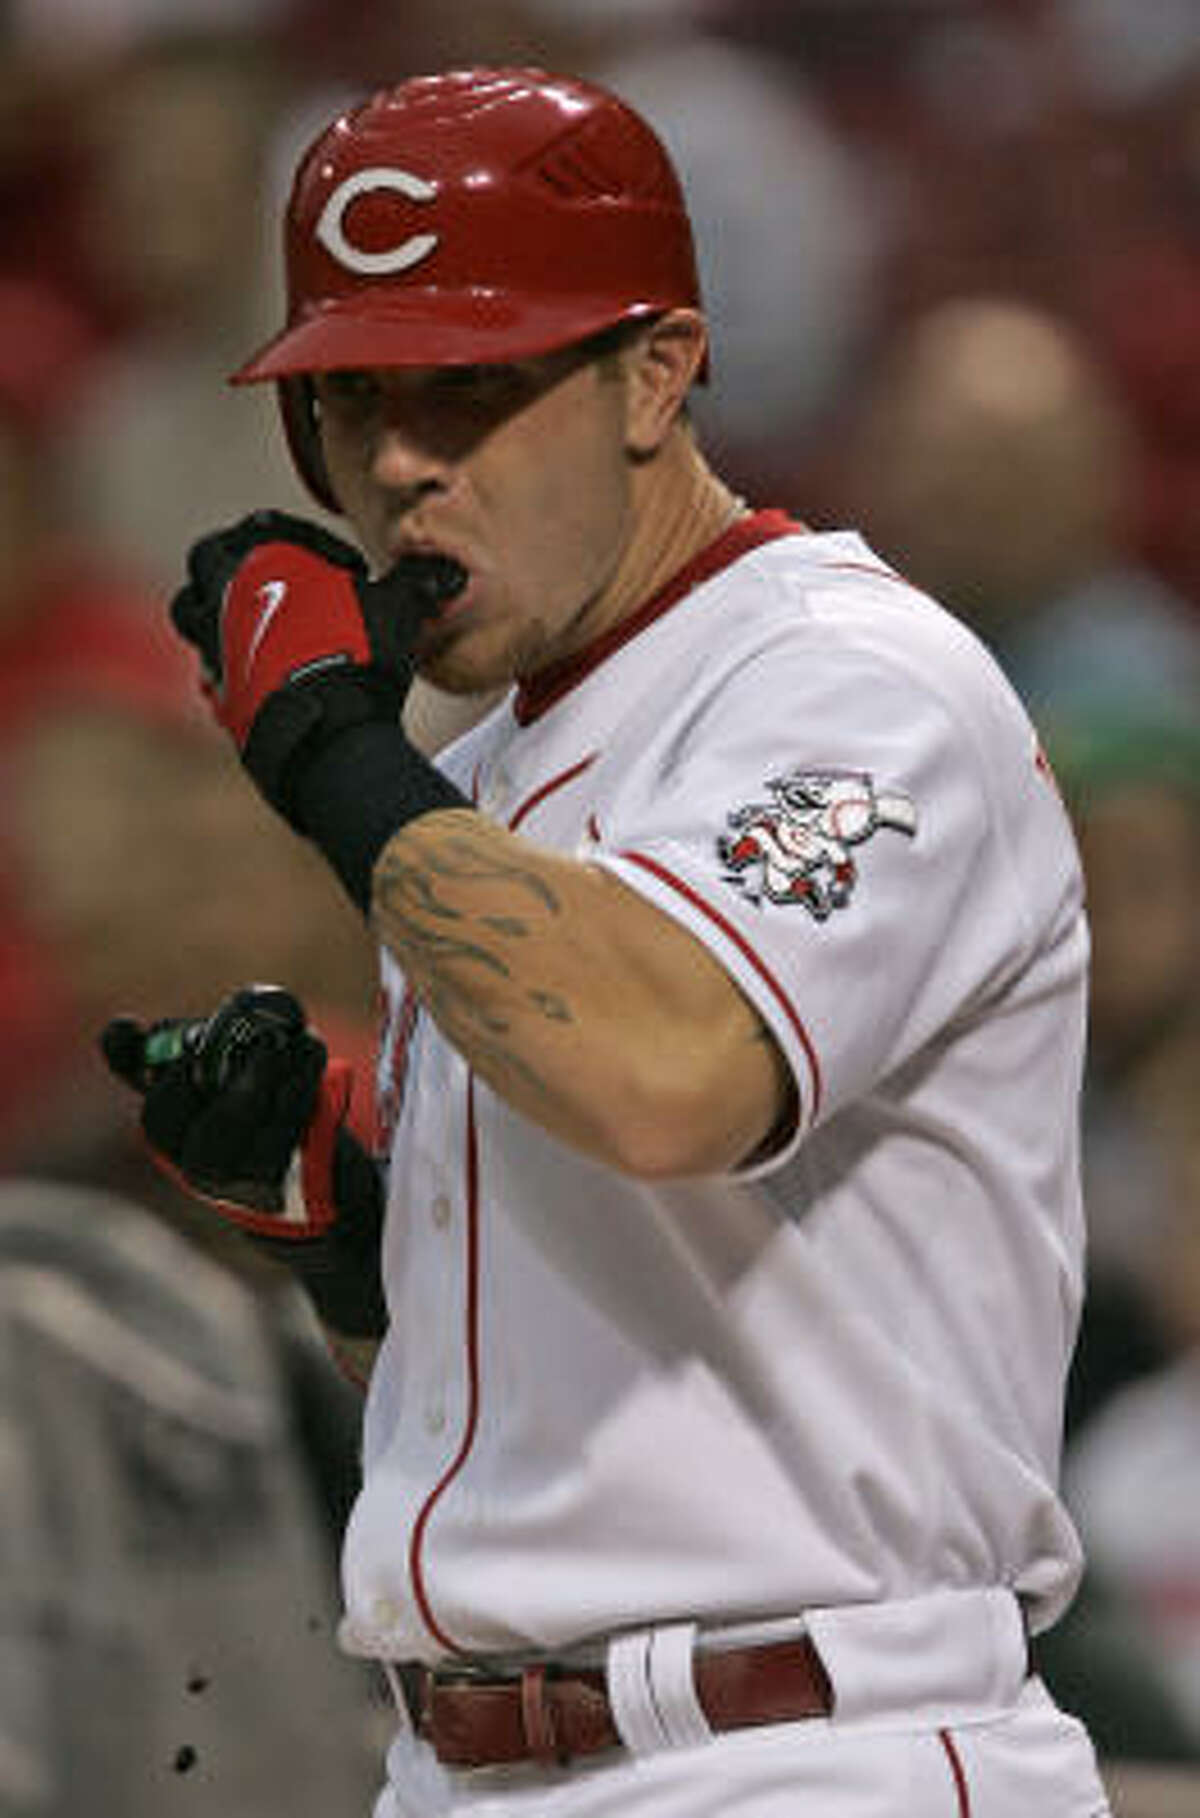 Former Reds and current Rangers outfielder Josh Hamilton chewed early in his career but has since quit.